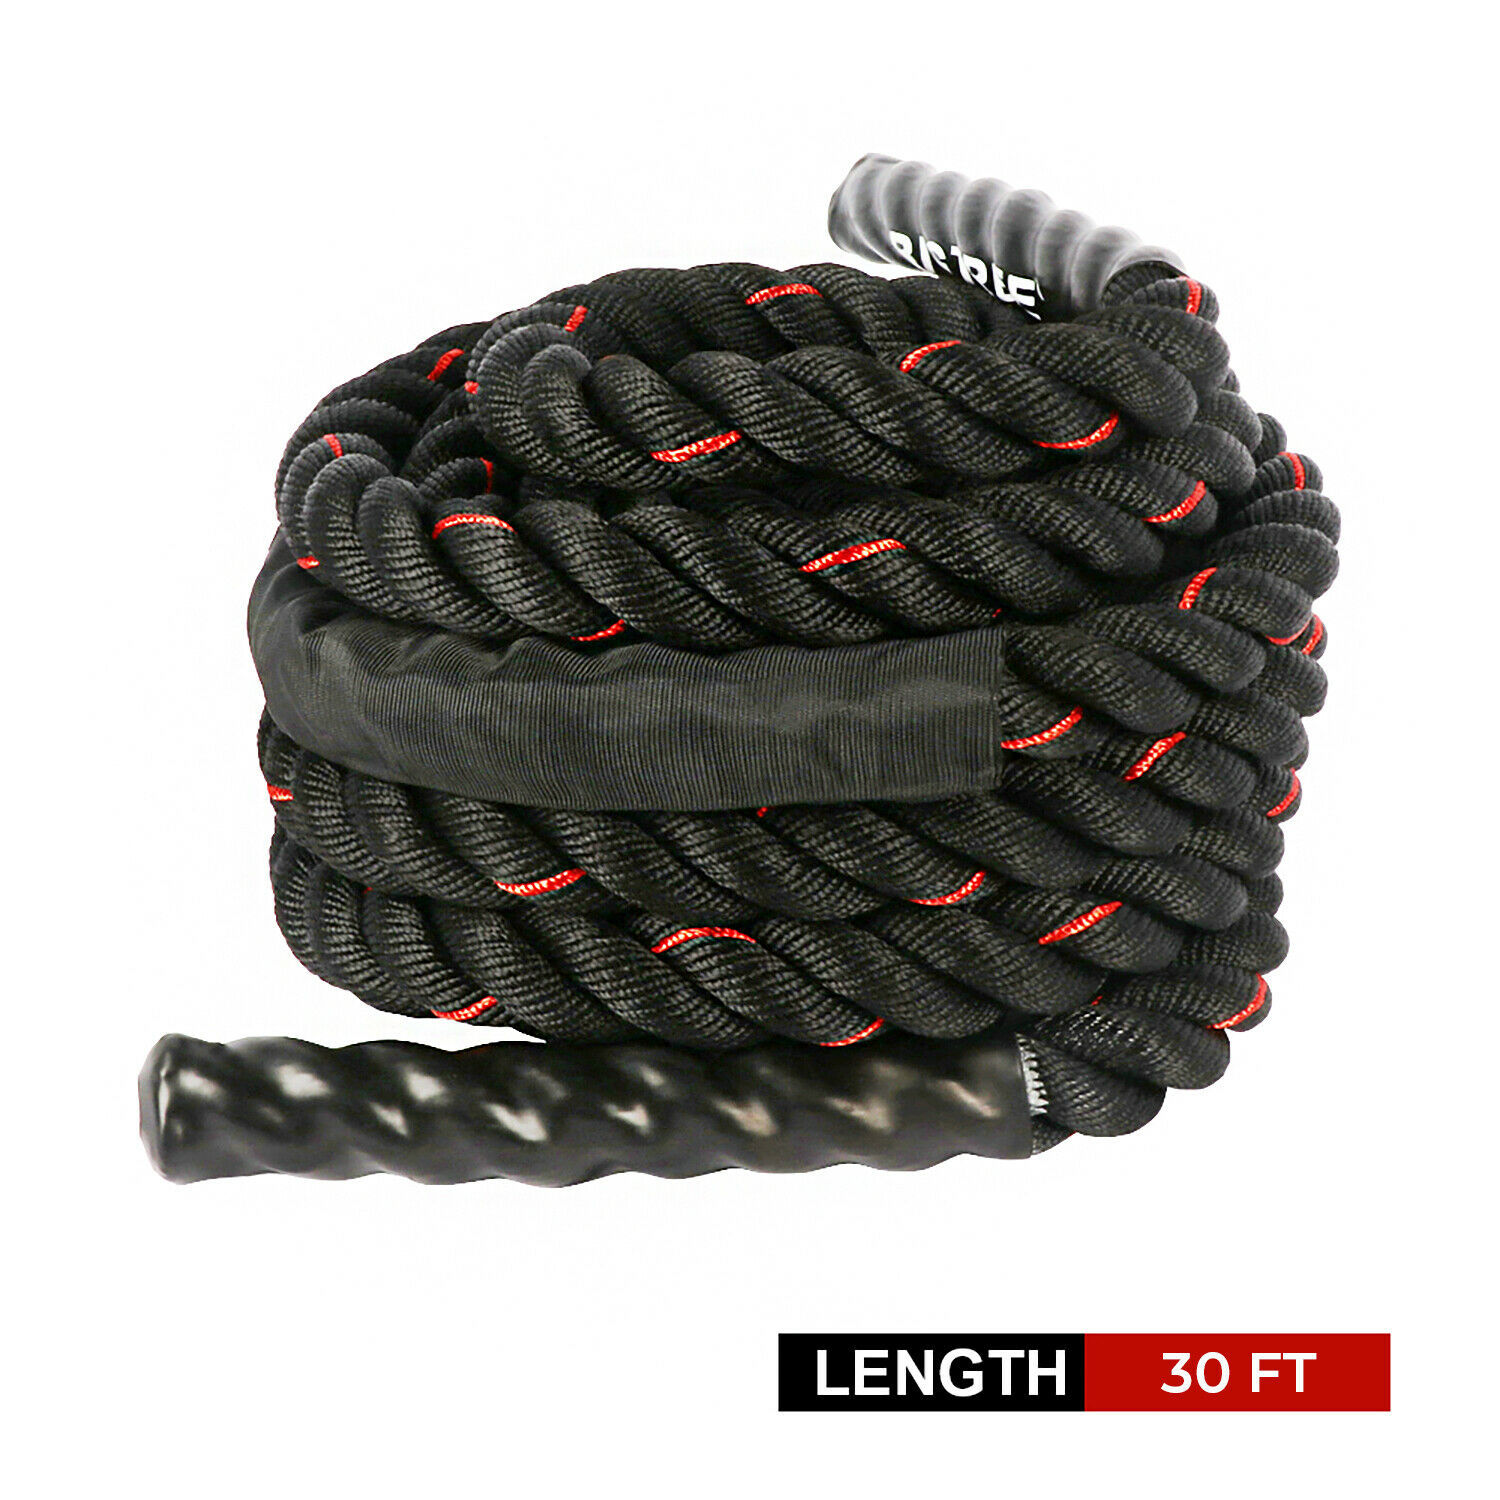 1.5″ Battle Rope Poly Dacron Fitness Anchor Workout Training Cardio RED 30ft